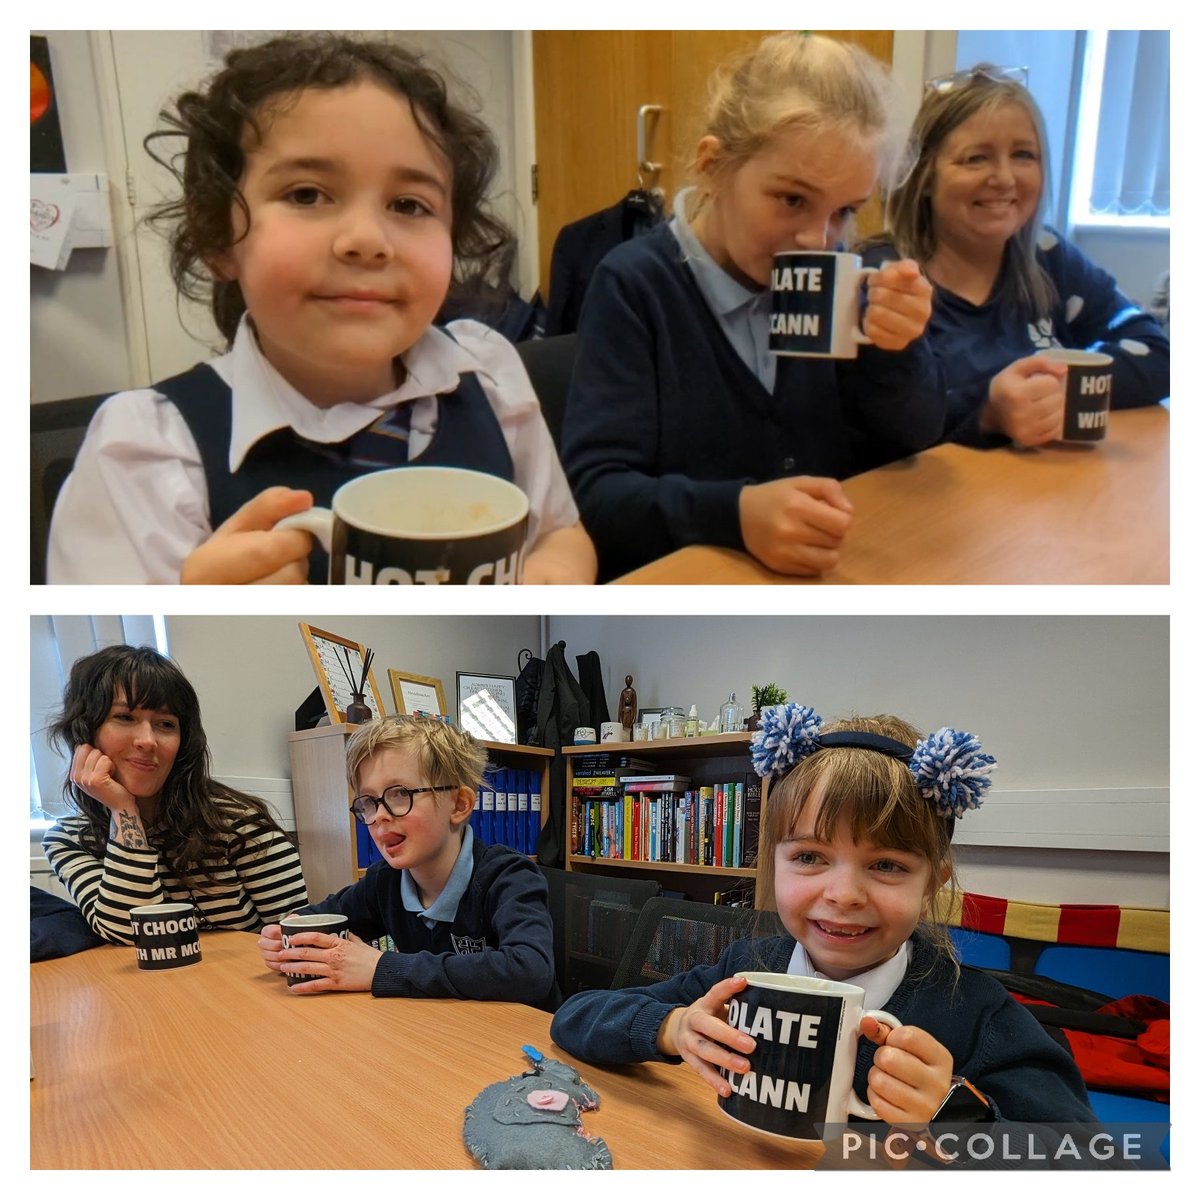 A brilliant end to a brilliant week in school, sharing Hot Chocolate with these superstars. Lots of celebrations today. Great work, great effort, great school family. Have a wonderful weekend everyone! ❤️ #MakeADifference